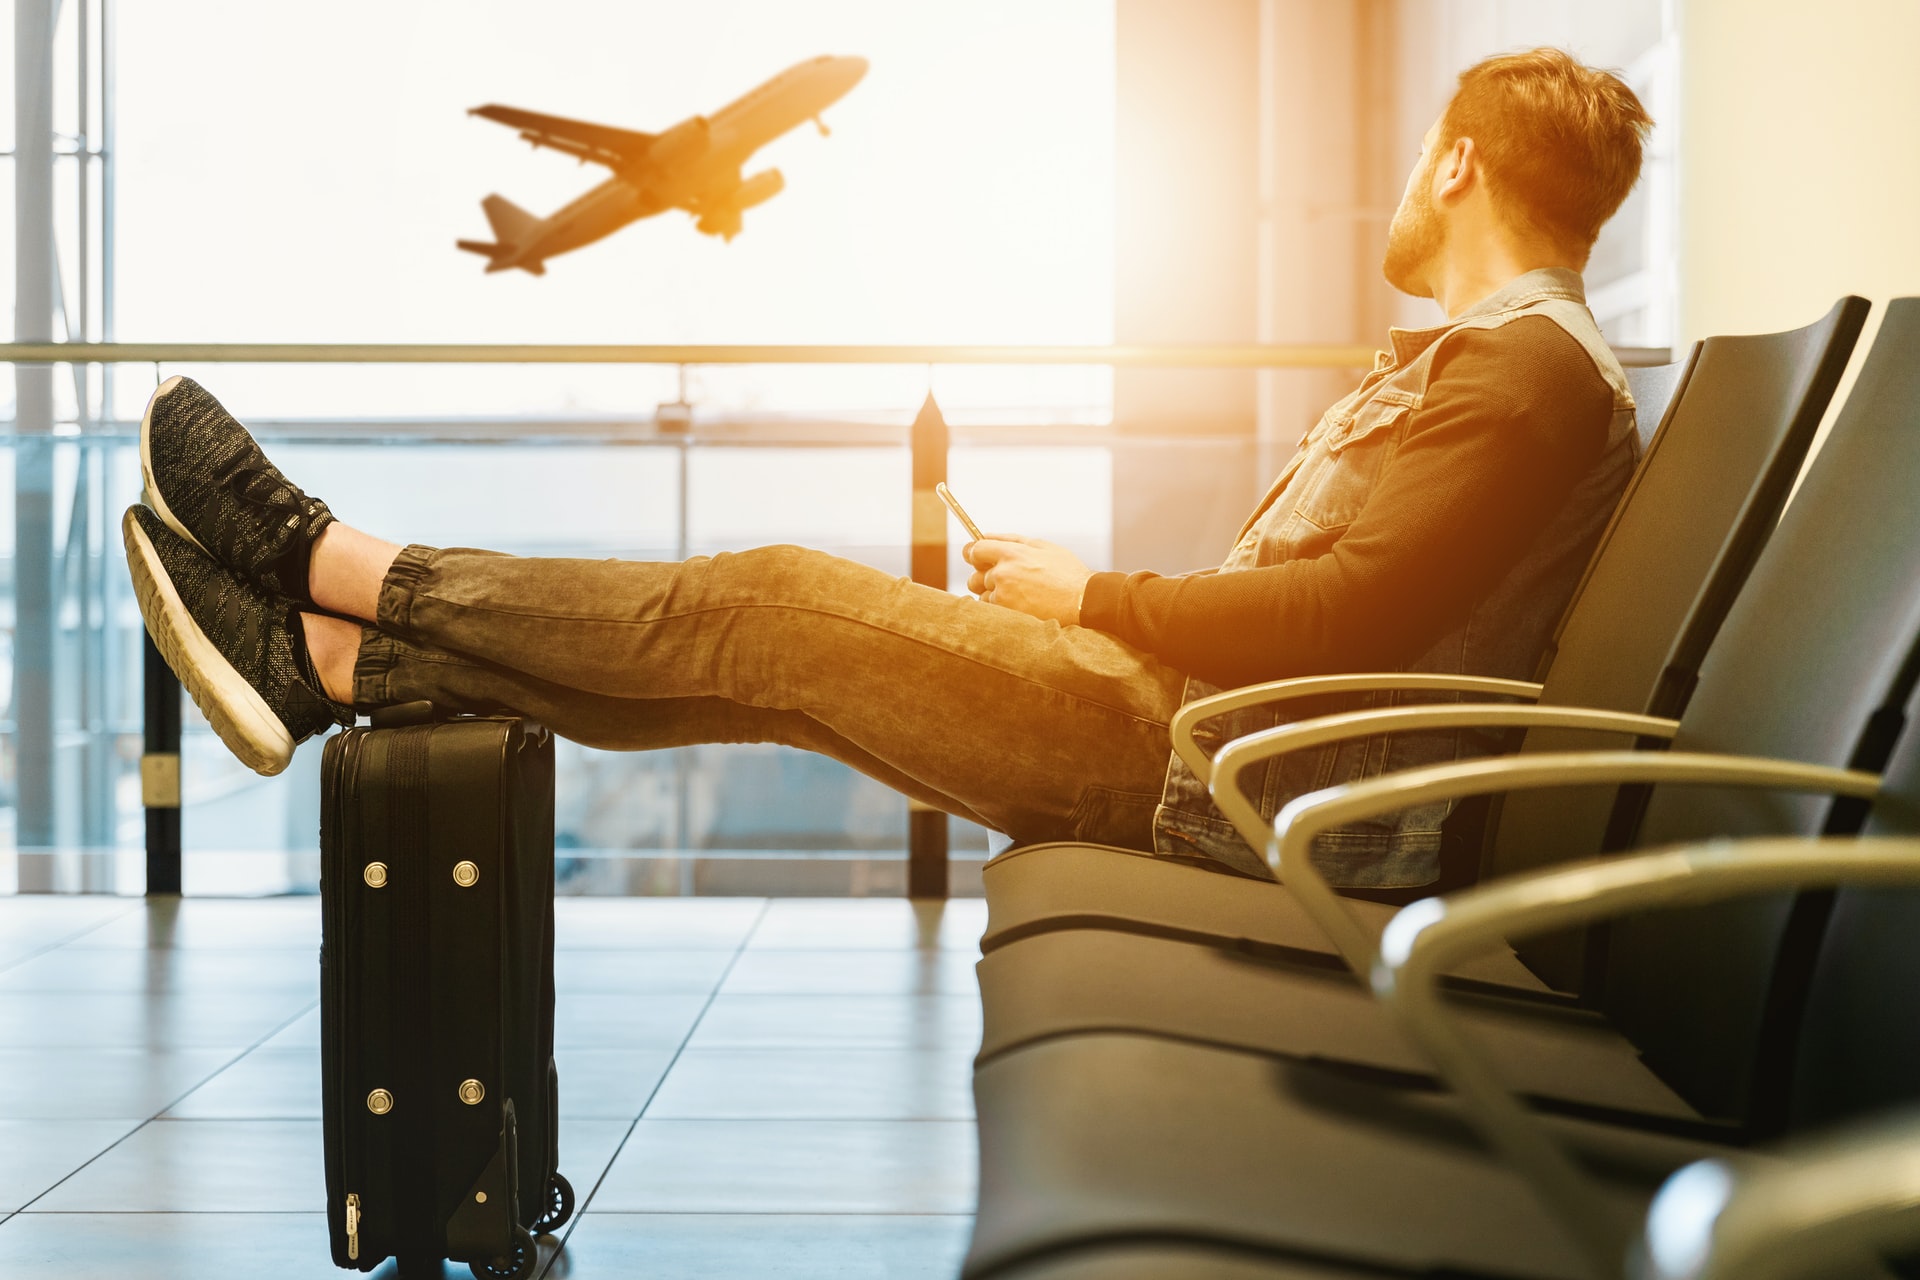 Coronavirus: 5 Important Tips for Traveling When Your Trips Get Cancelled